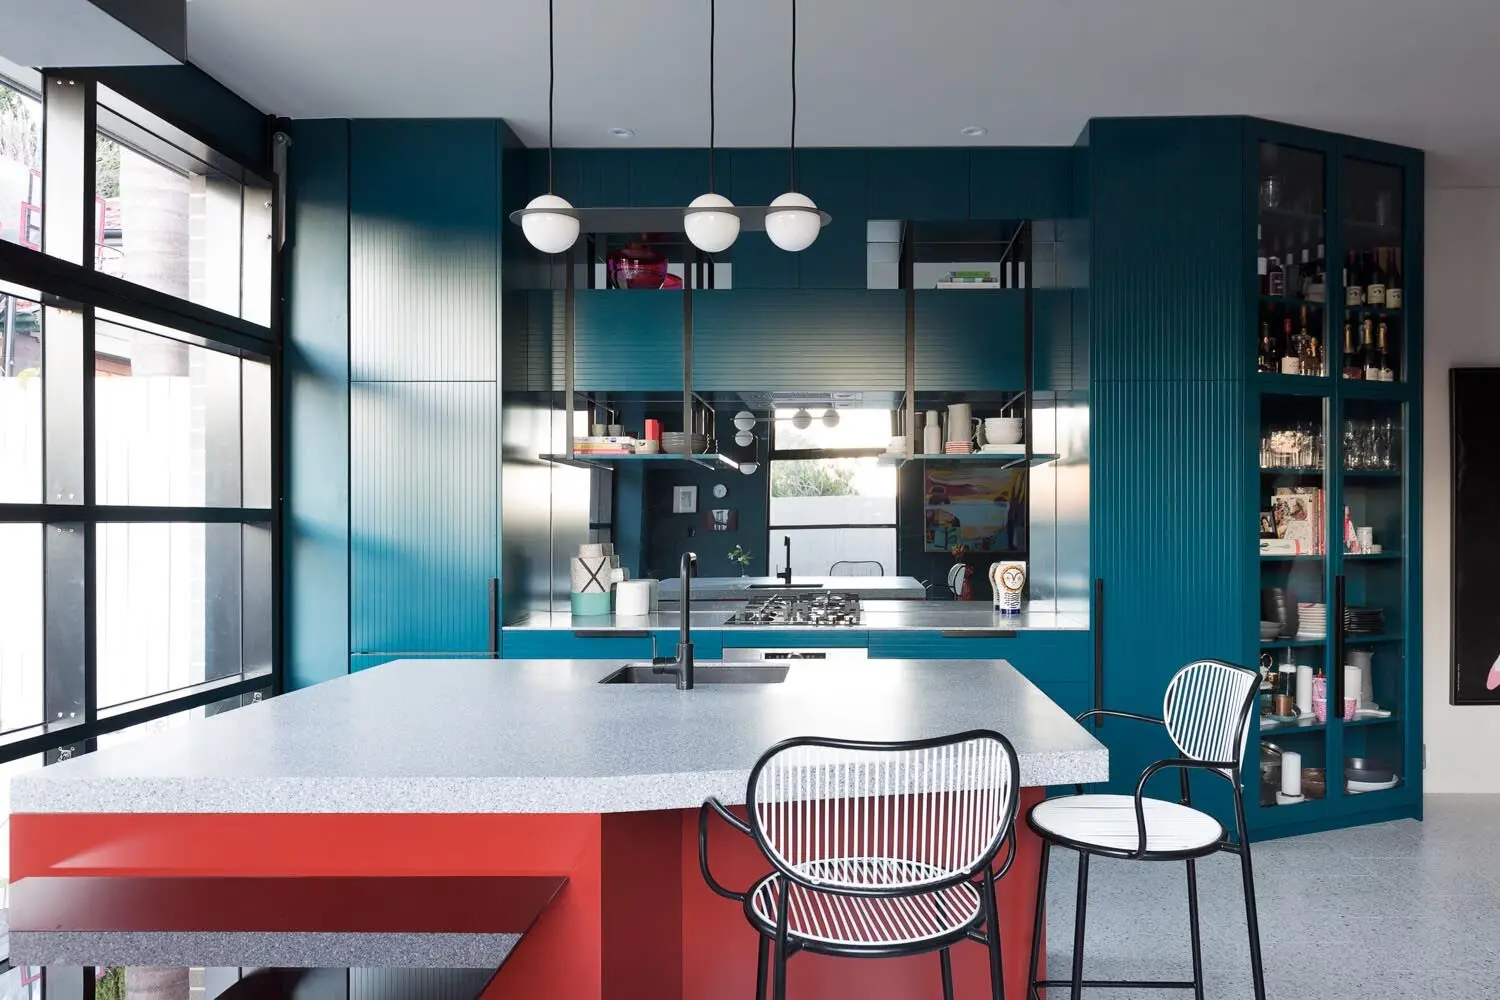 Kitchen with teal cabinets. Island bench with white top and red sides.